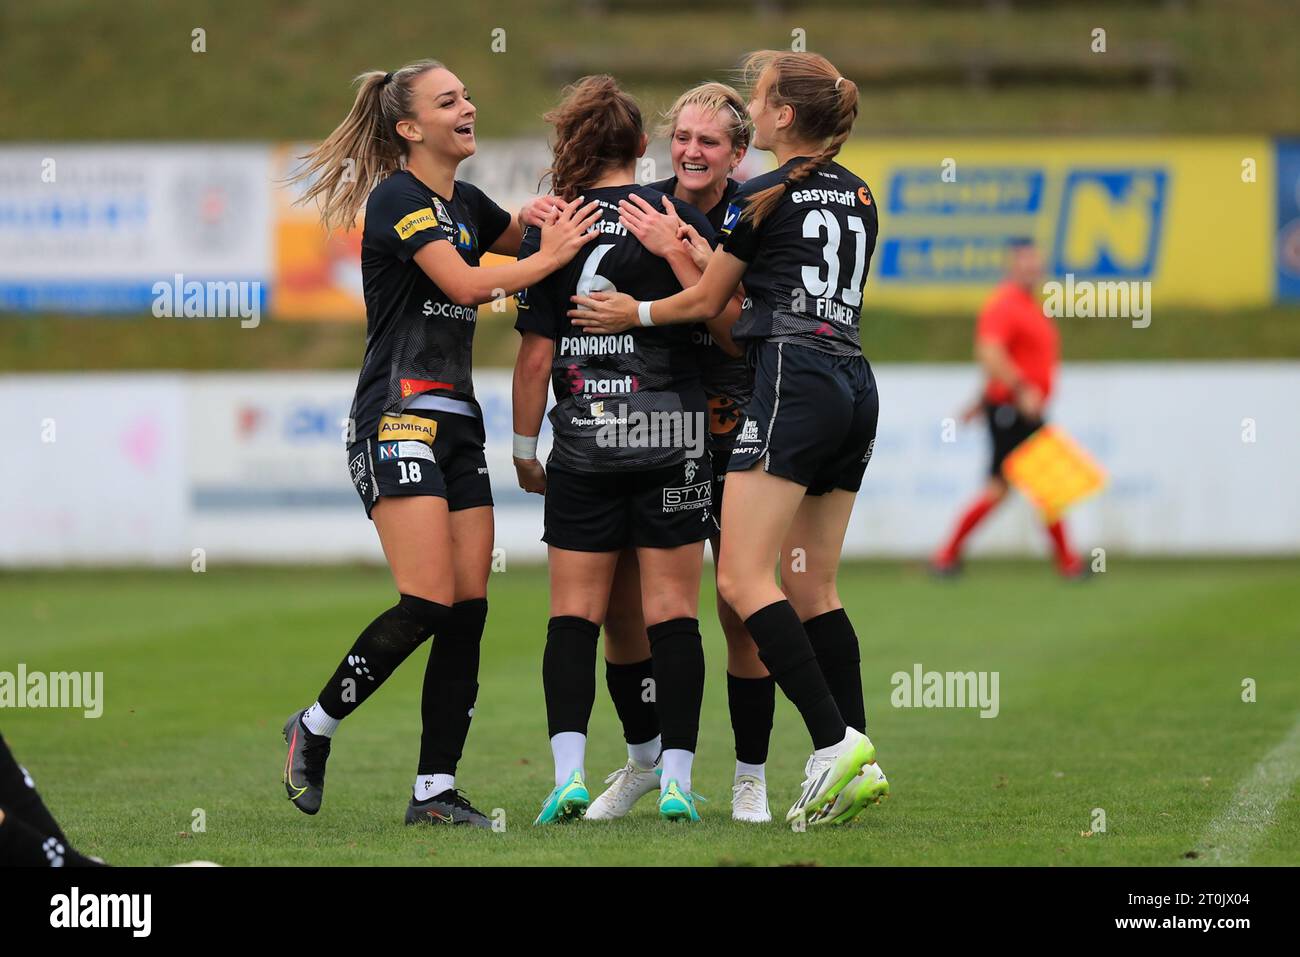 Neulengbach players celebrating a goal during the Admiral Frauen Bundesliga match Neulengbach vs Austria Wien at Wienerwald Stadion (Tom Seiss/ SPP) Credit: SPP Sport Press Photo. /Alamy Live News Stock Photo